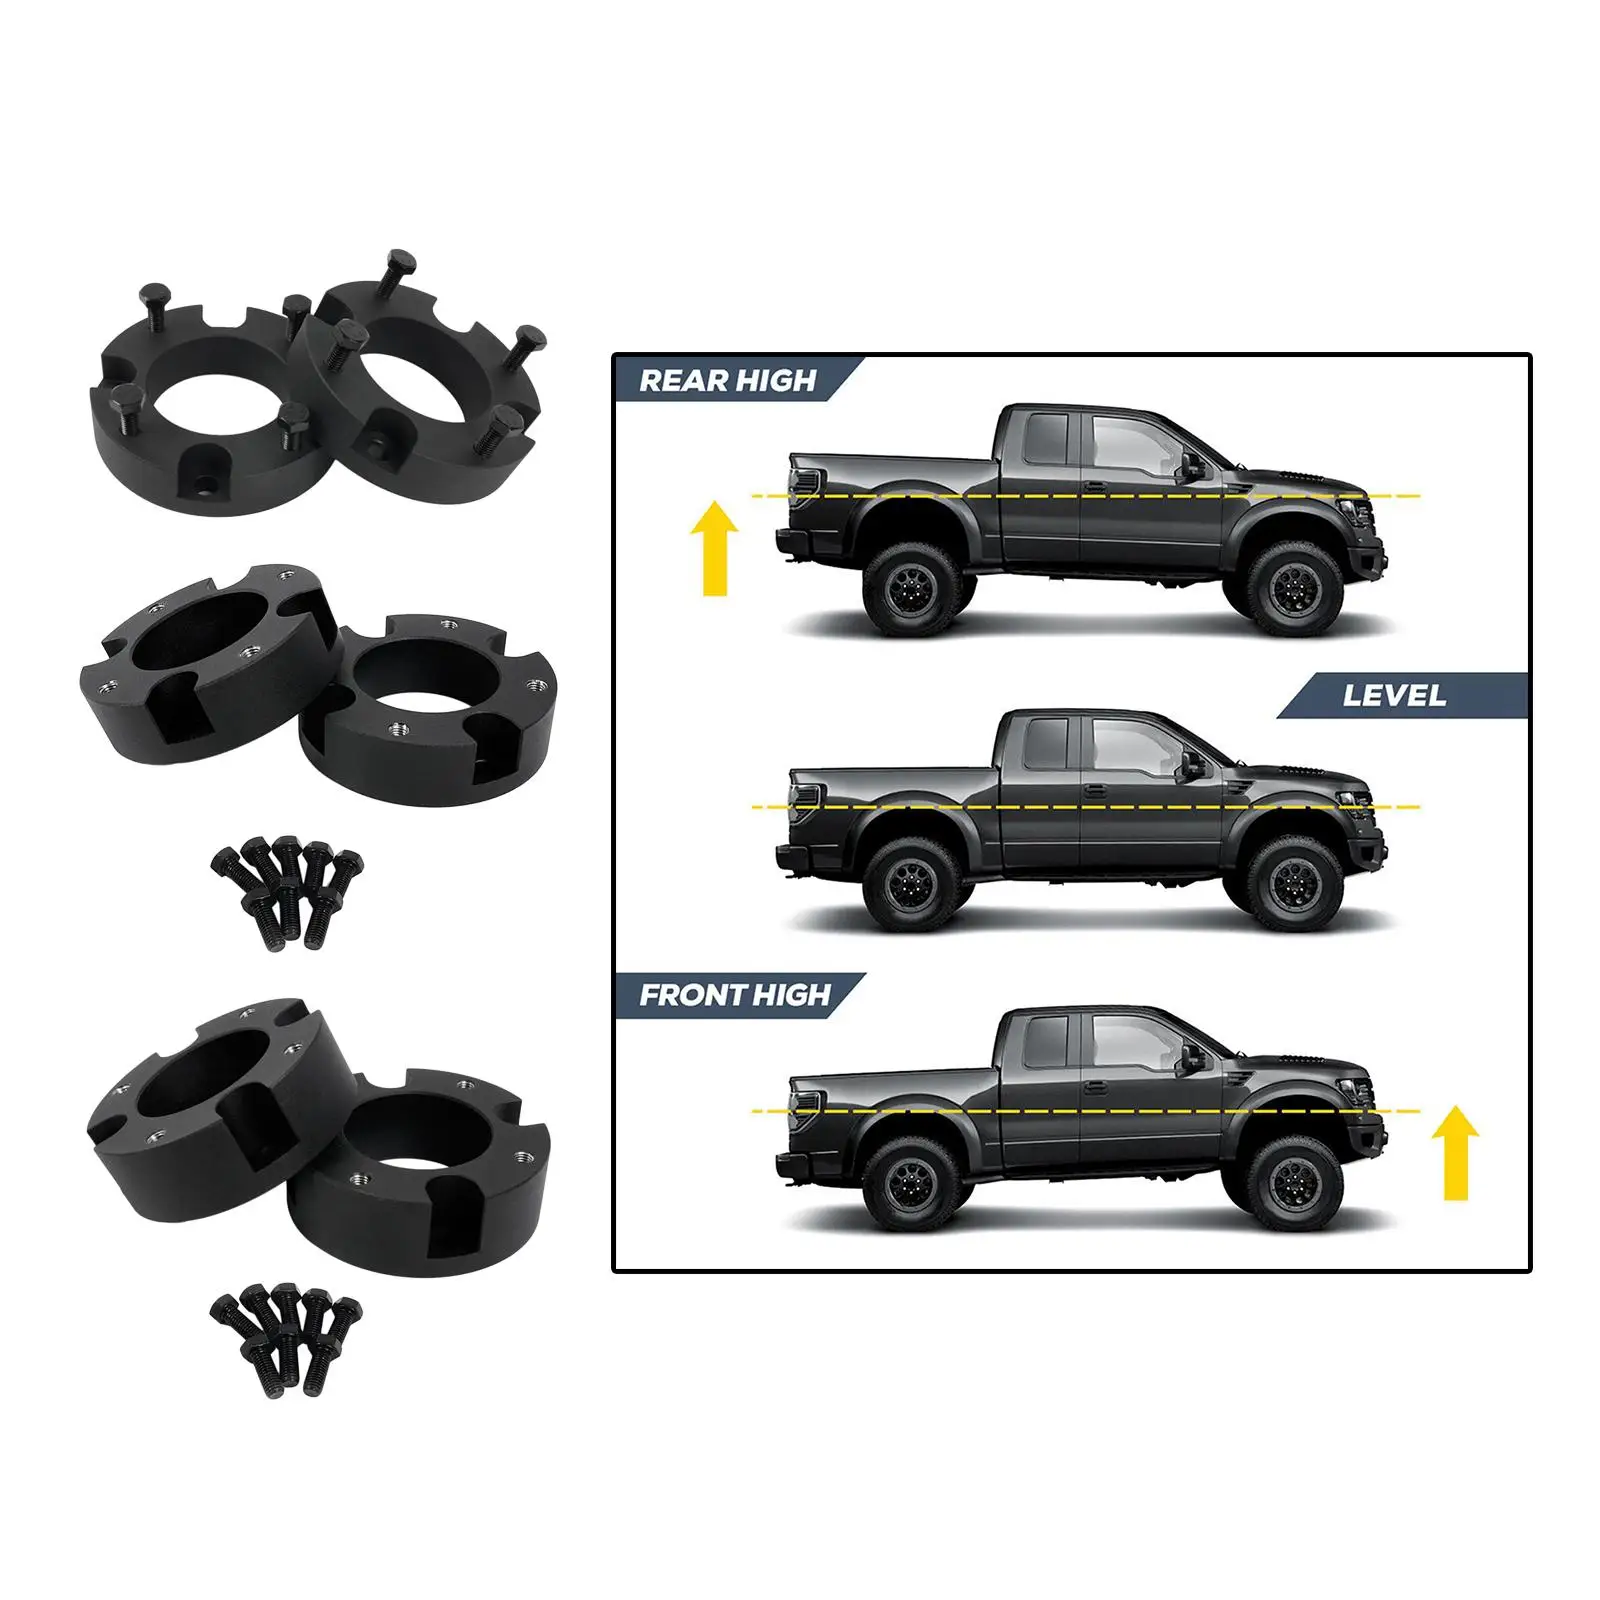 Black Leveling Lift Set with Screw Direct Replaces Easy to Install Billet Wheel Spacers for Toyota for tundra 4WD 2WD 2007-2019